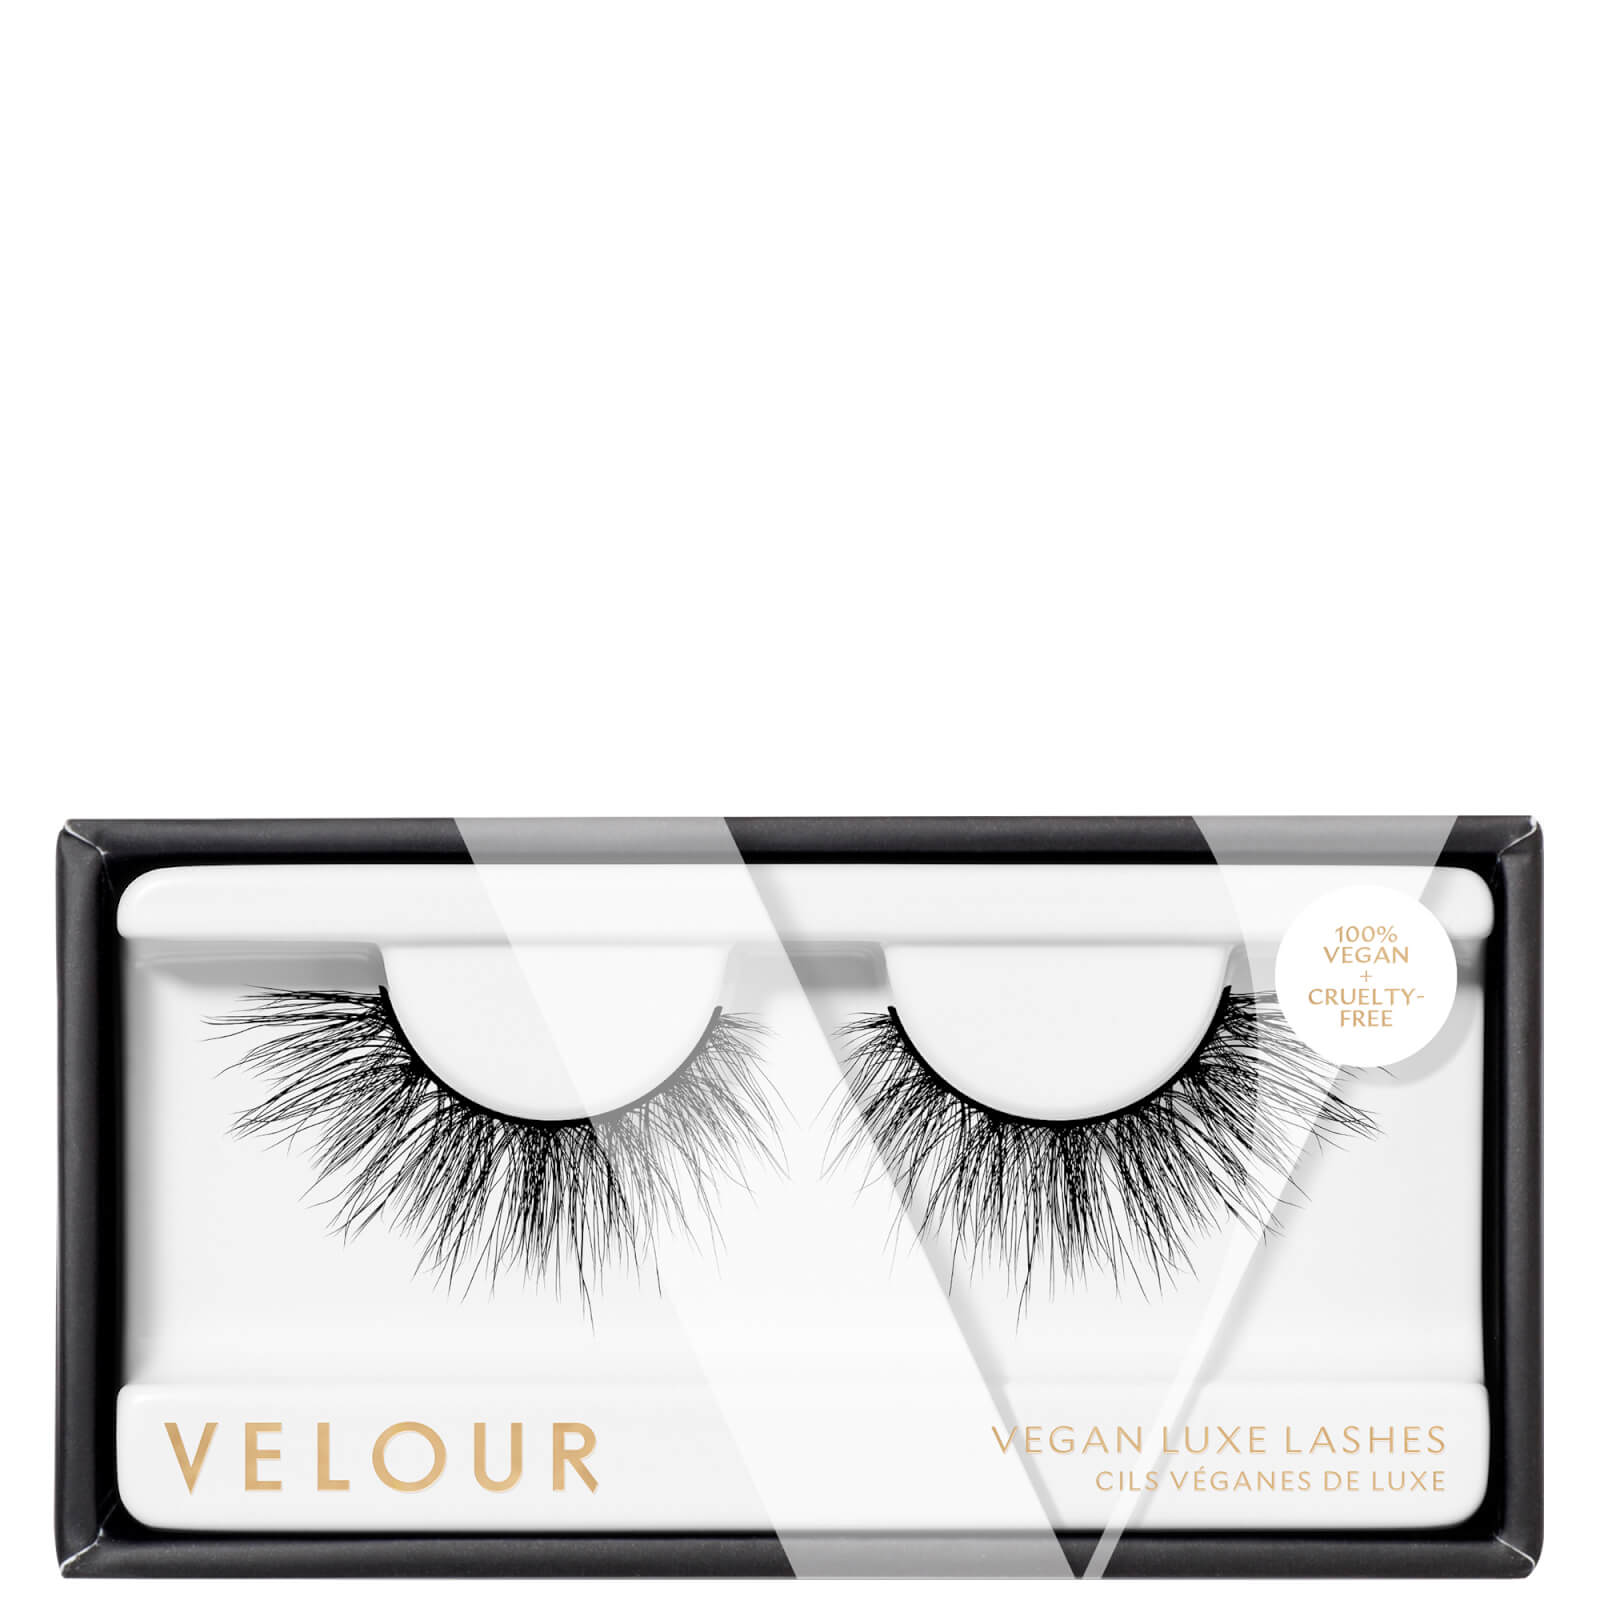 Image of Velour Vegan Luxe Sinful Lashes